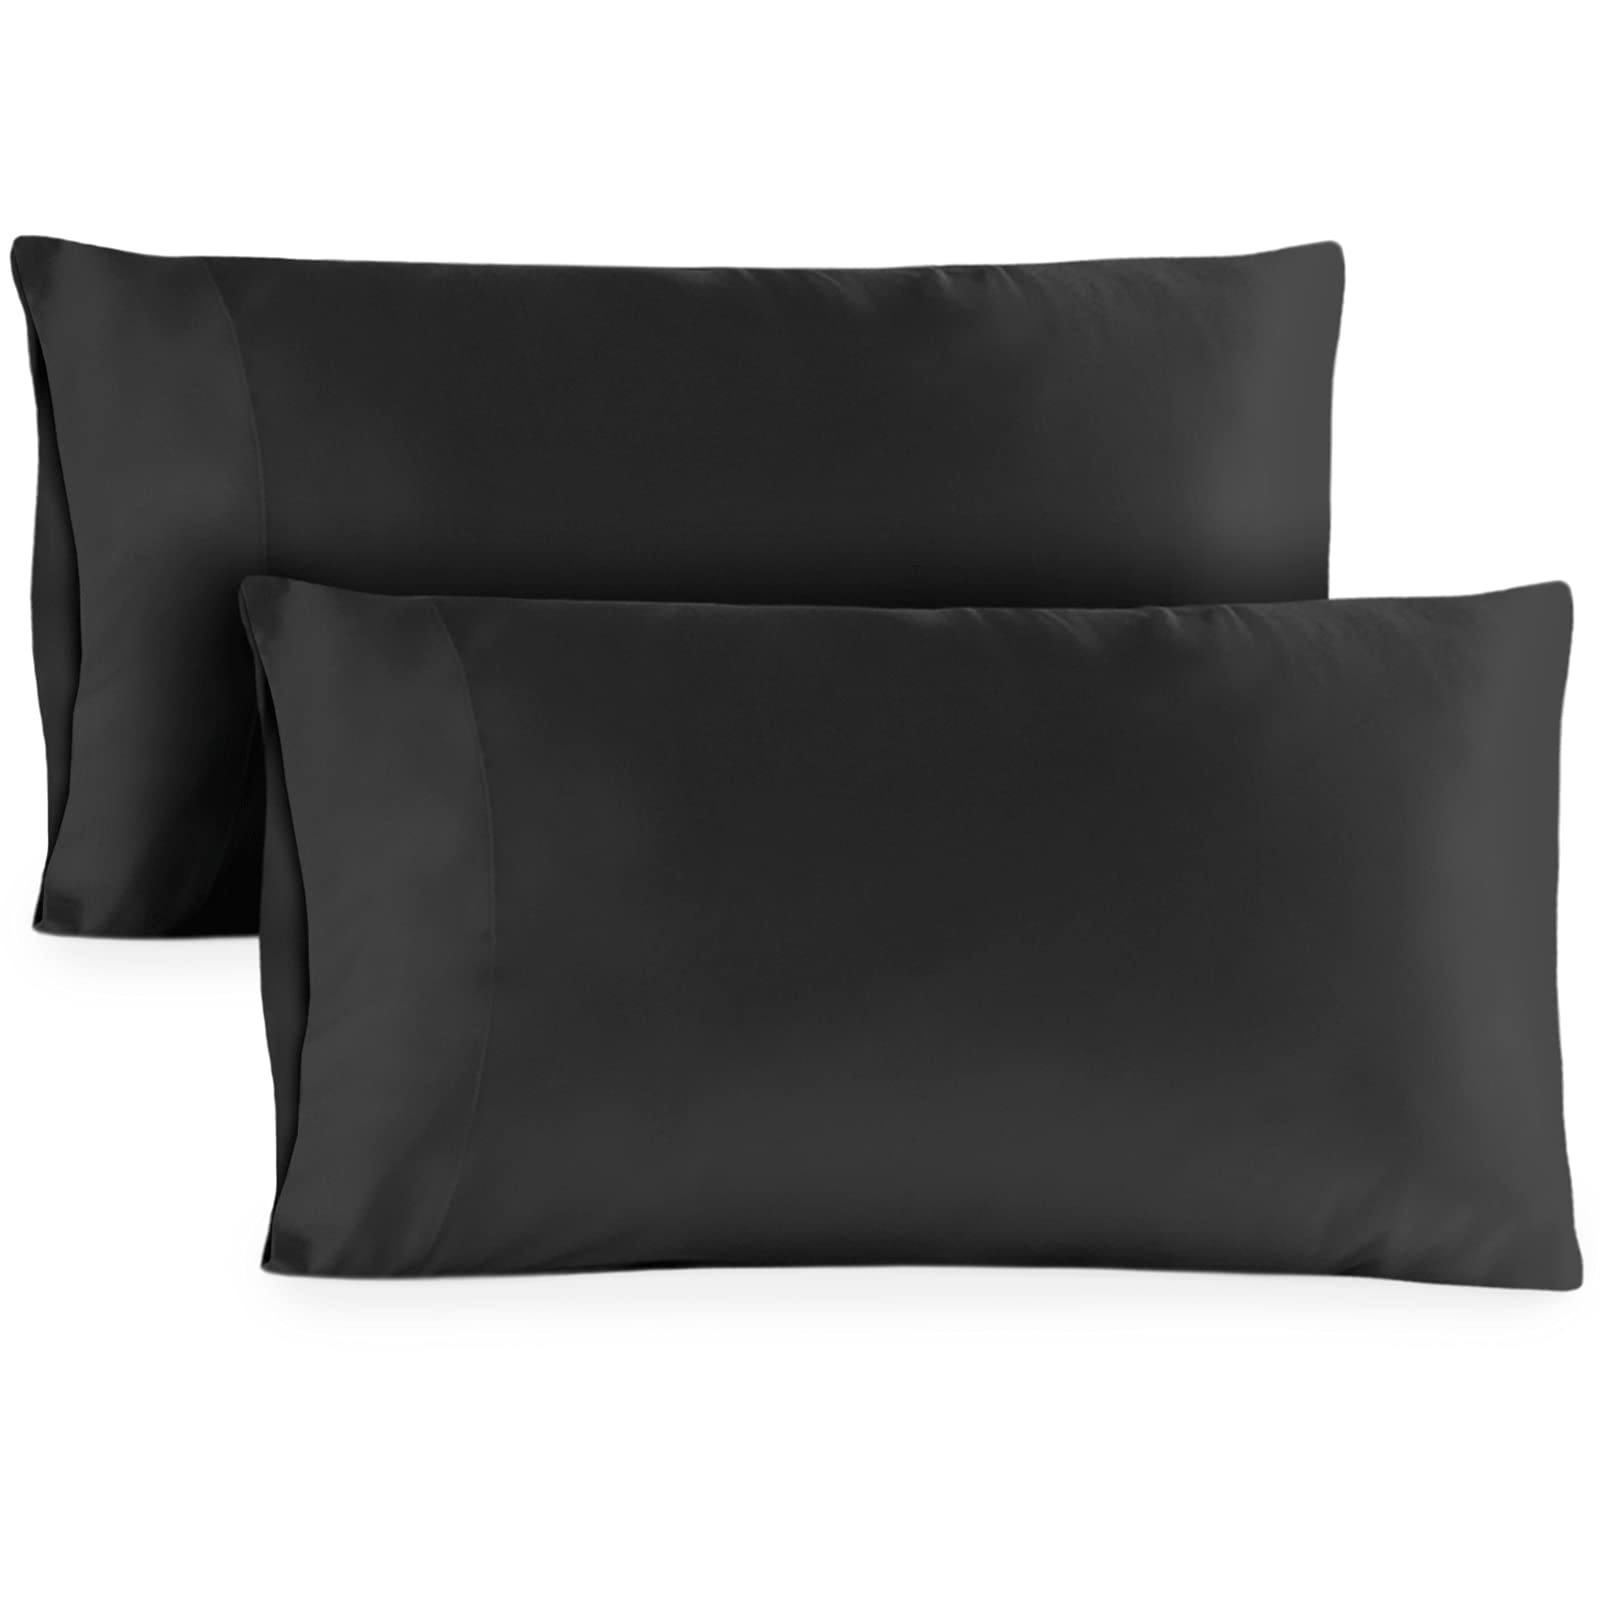 Book Cover Hotel Sheets Direct King Size Pillow Cases 2 Pack - 20x40 Inch Cooling Pillow Cases for King Size Pillows - Silky Pillowcase for Hair and Skin - Black 2 King Pillowcases Black